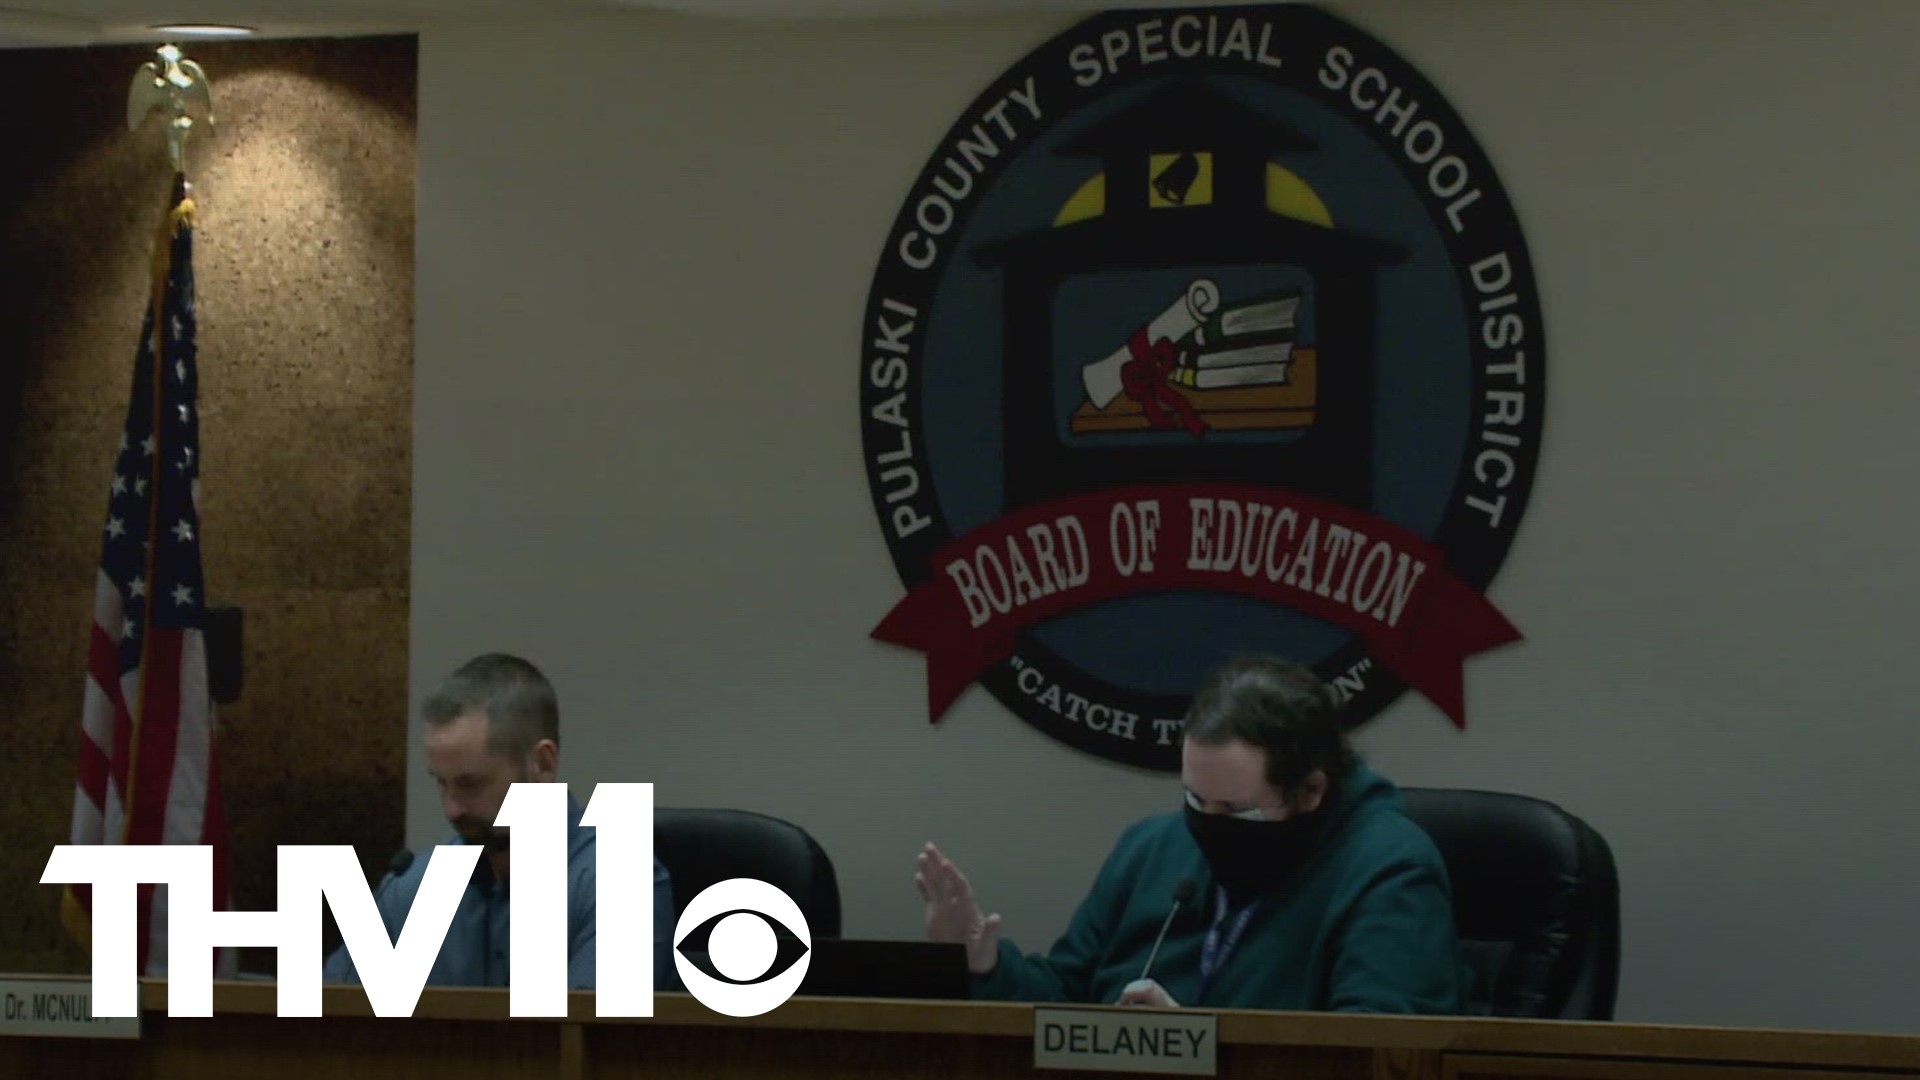 The Pulaski County Special School District is recommending to close its virtual school at the end of the academic year due to a decline in enrollment.